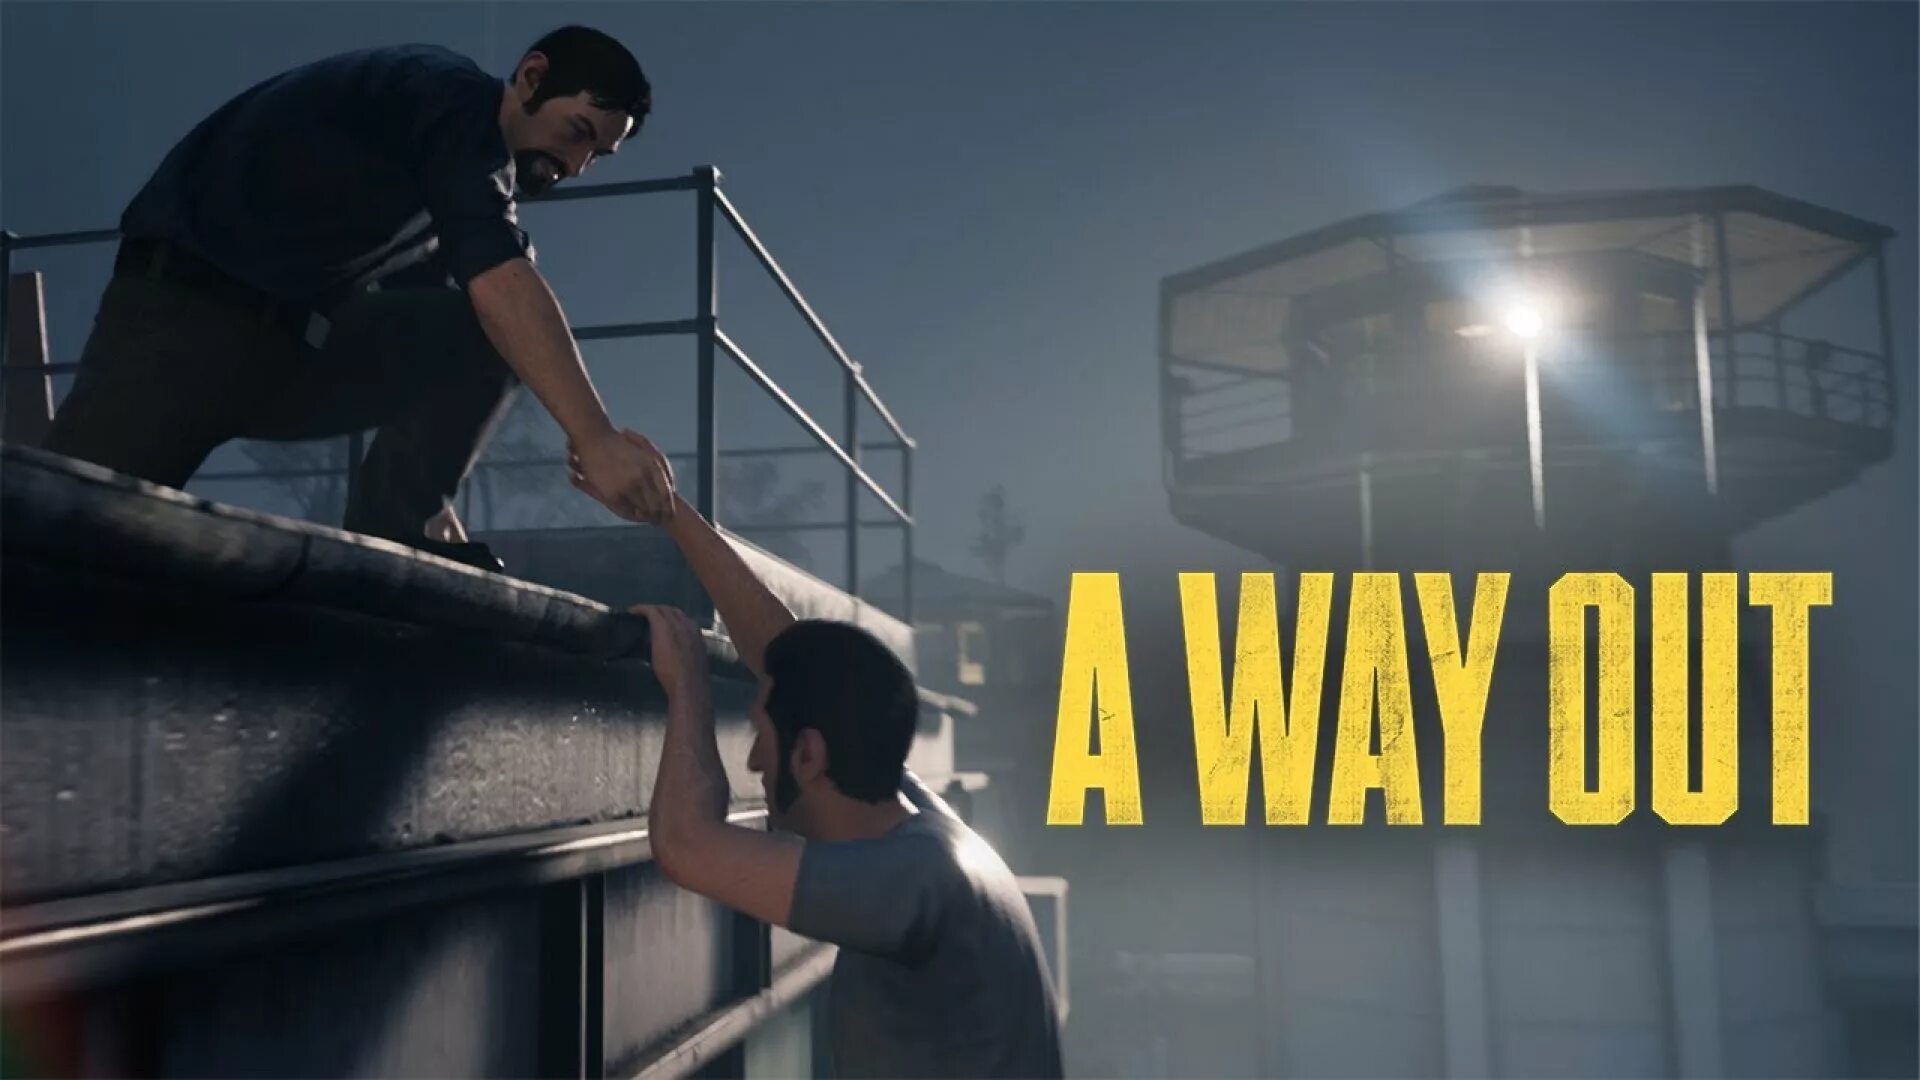 Only way game. Way out игра. Побег из тюрьмы a way out. А Wаy оut игра. A way AOT.